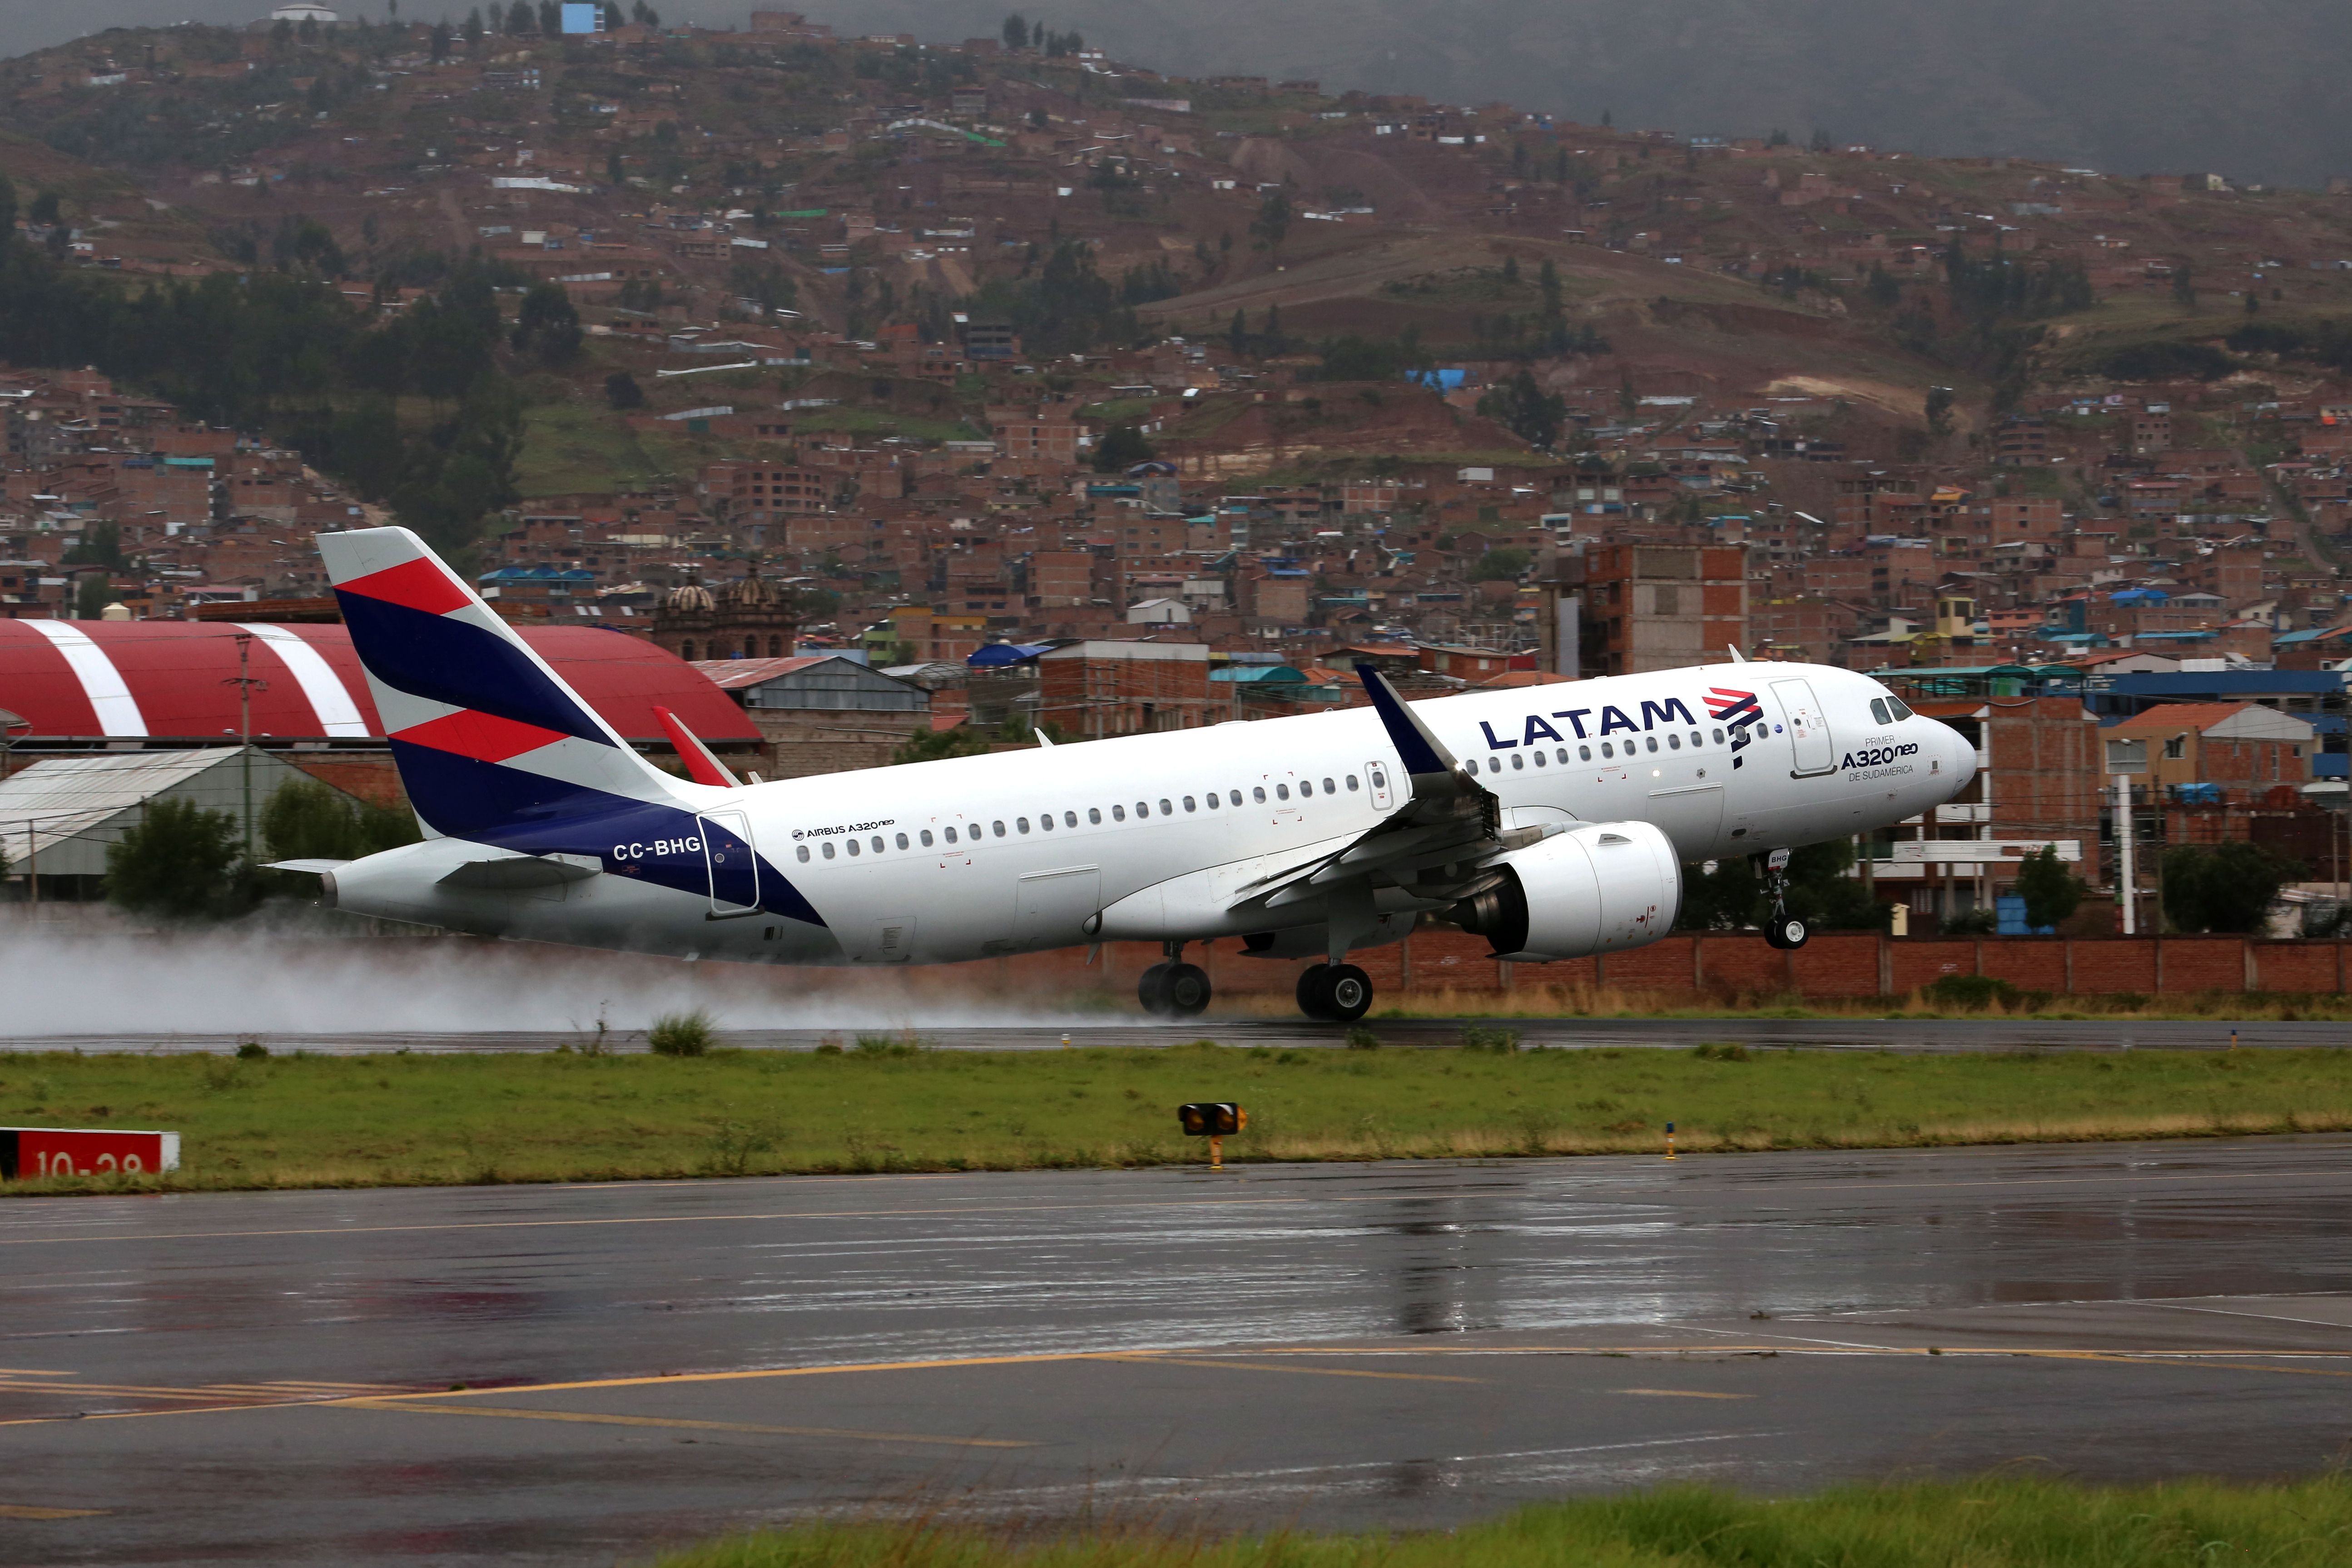 A LATAM Airbus A320 departing from 